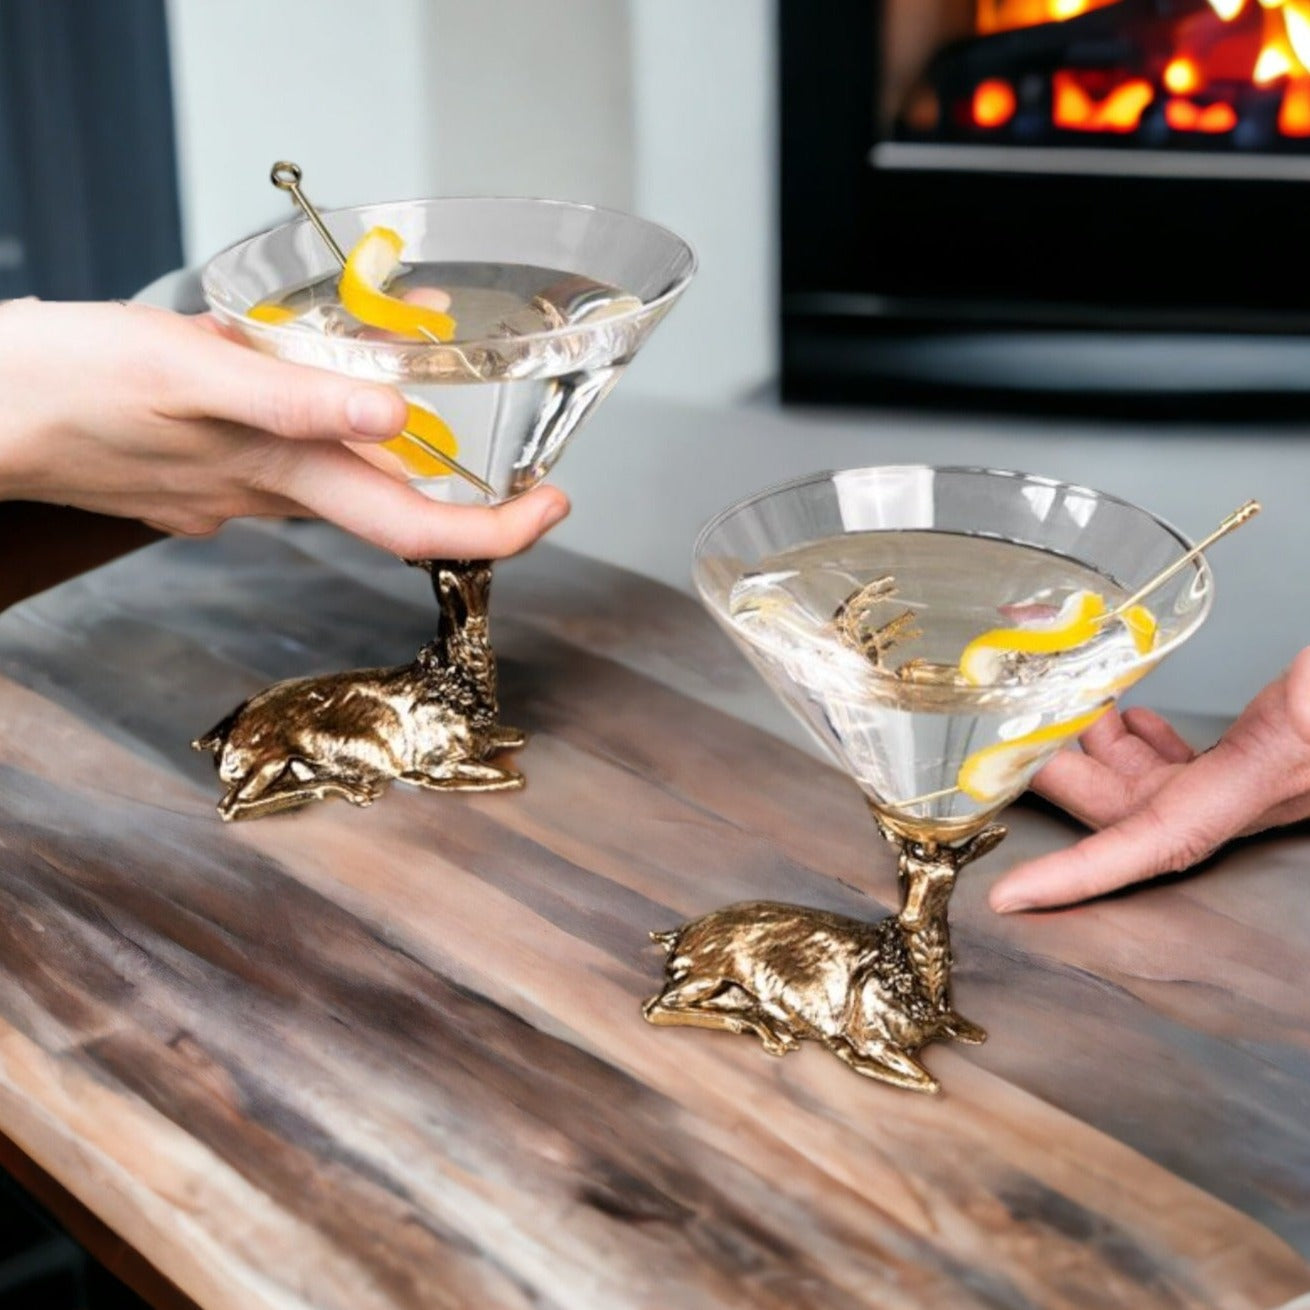 The Best Martini Glasses of 2022